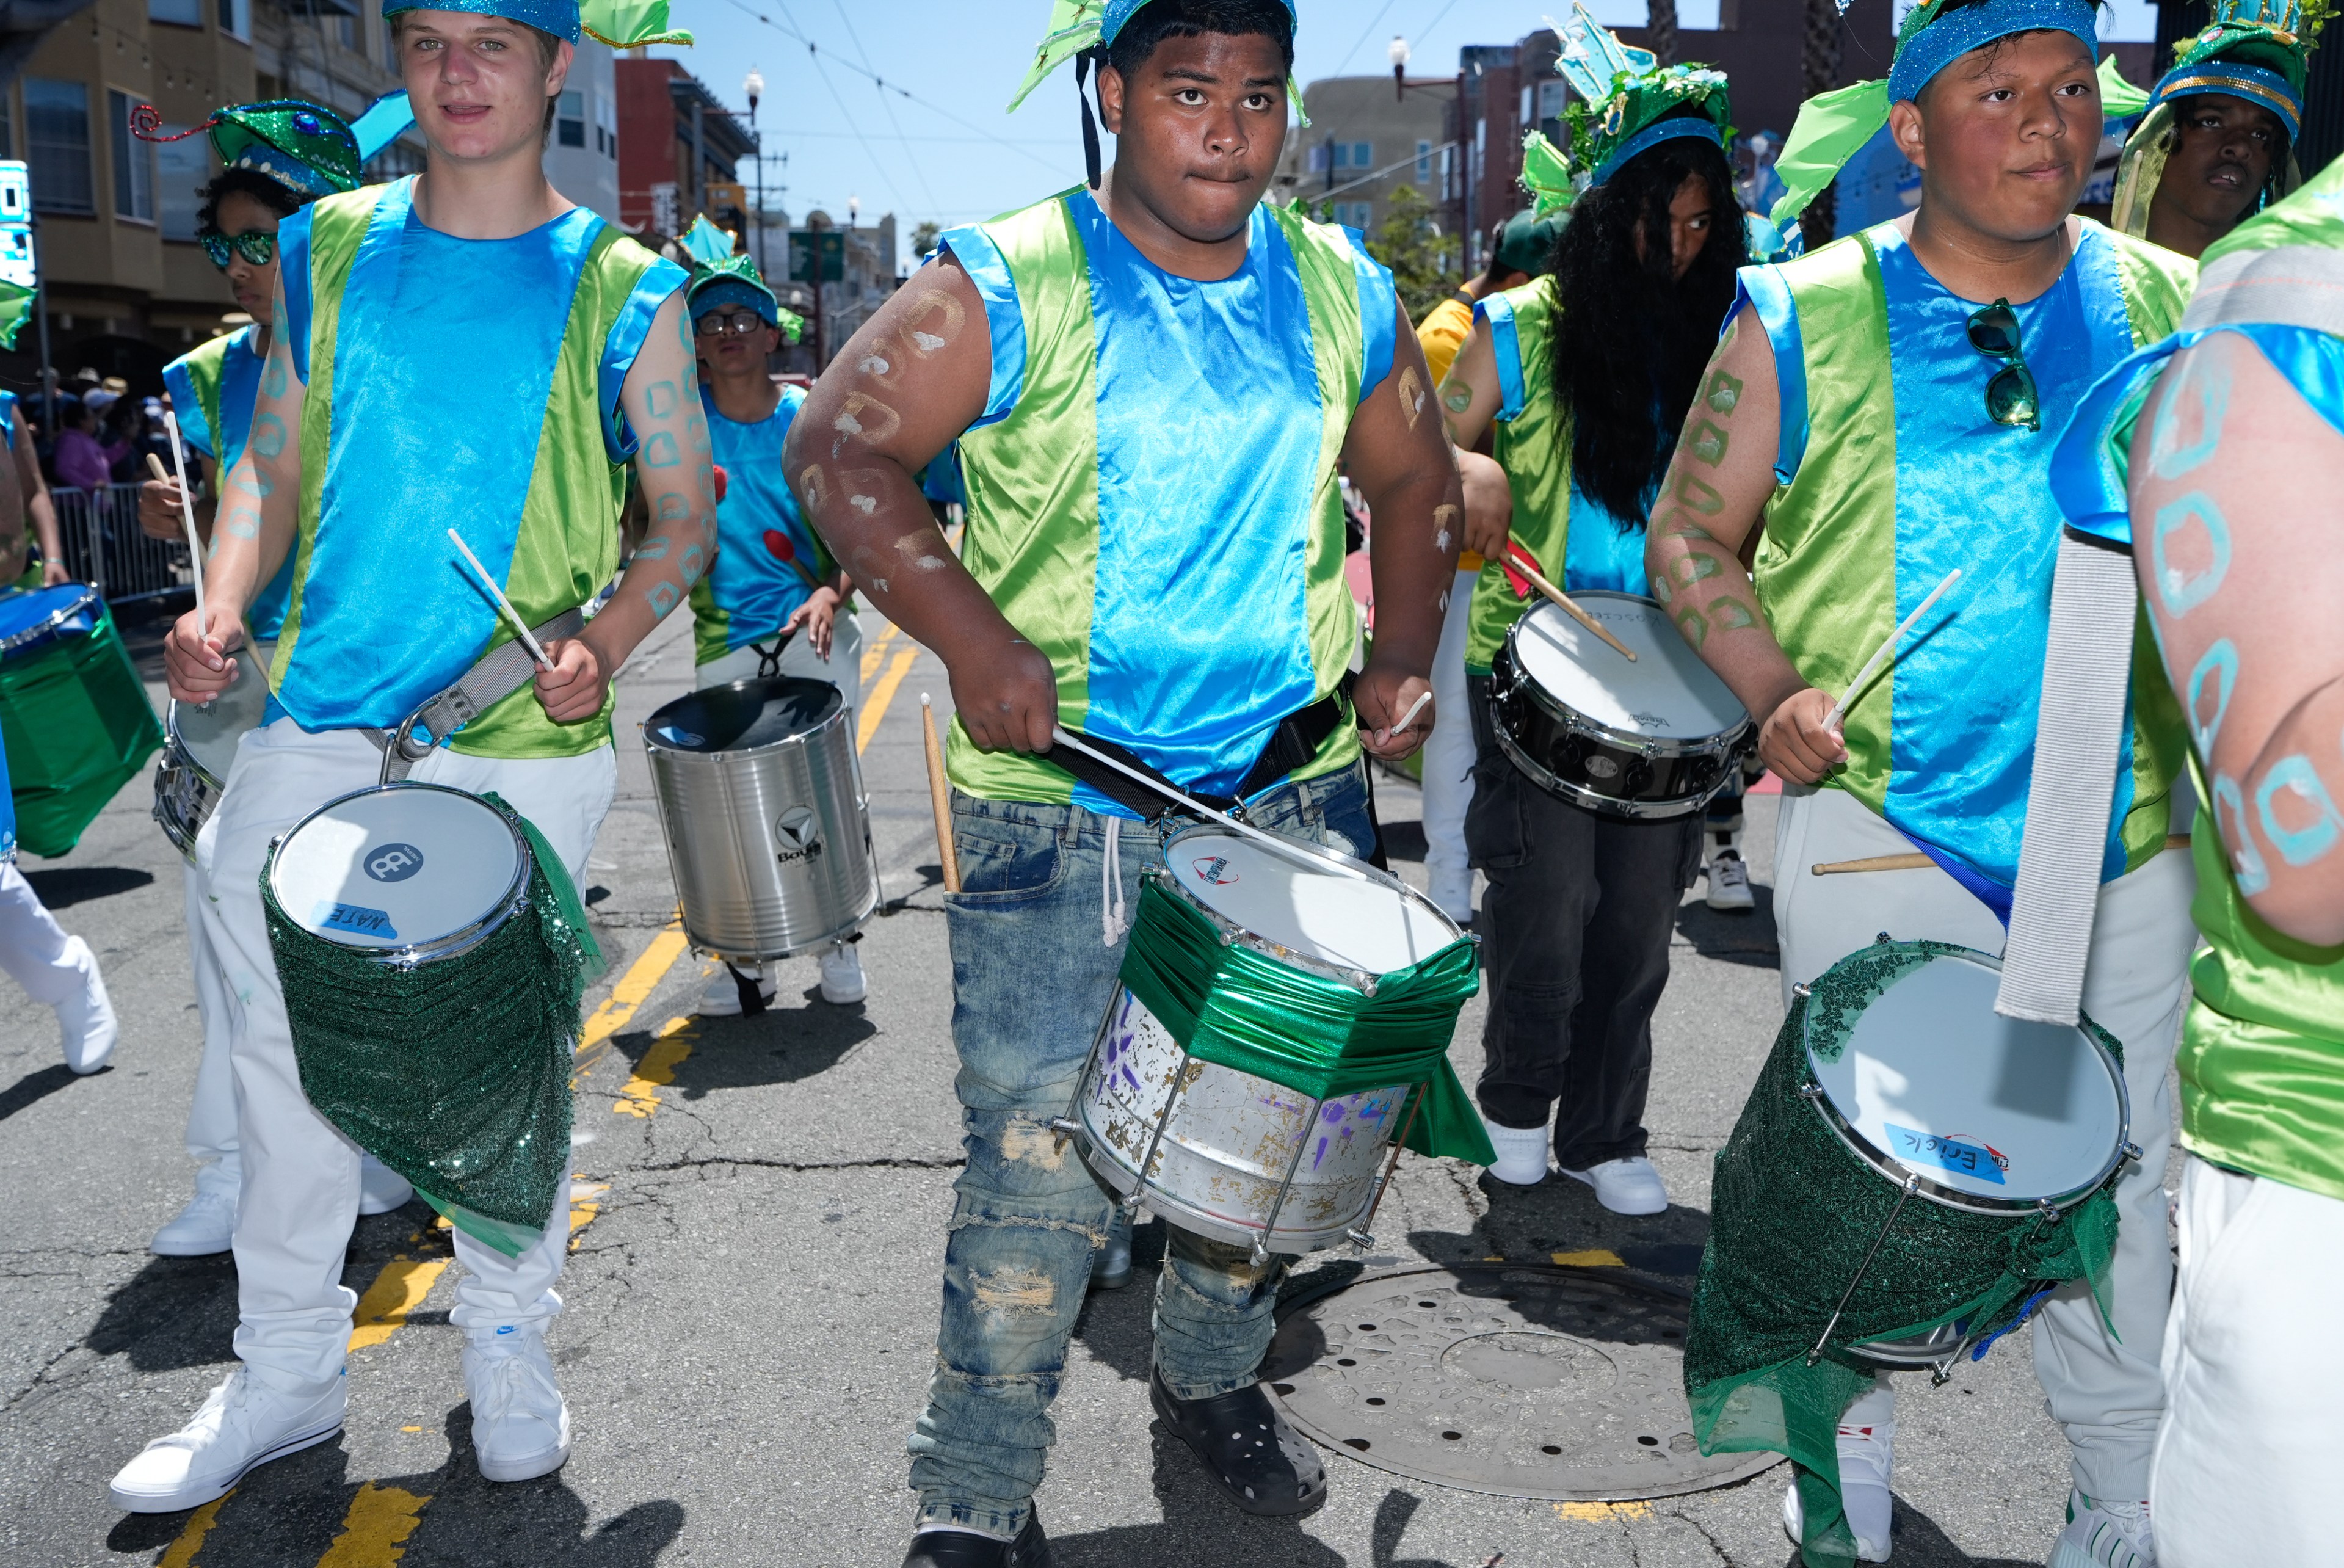 A group of people in vibrant blue and green outfits march down a street playing drums. They wear headgear and body paint, with a lively, festive atmosphere.